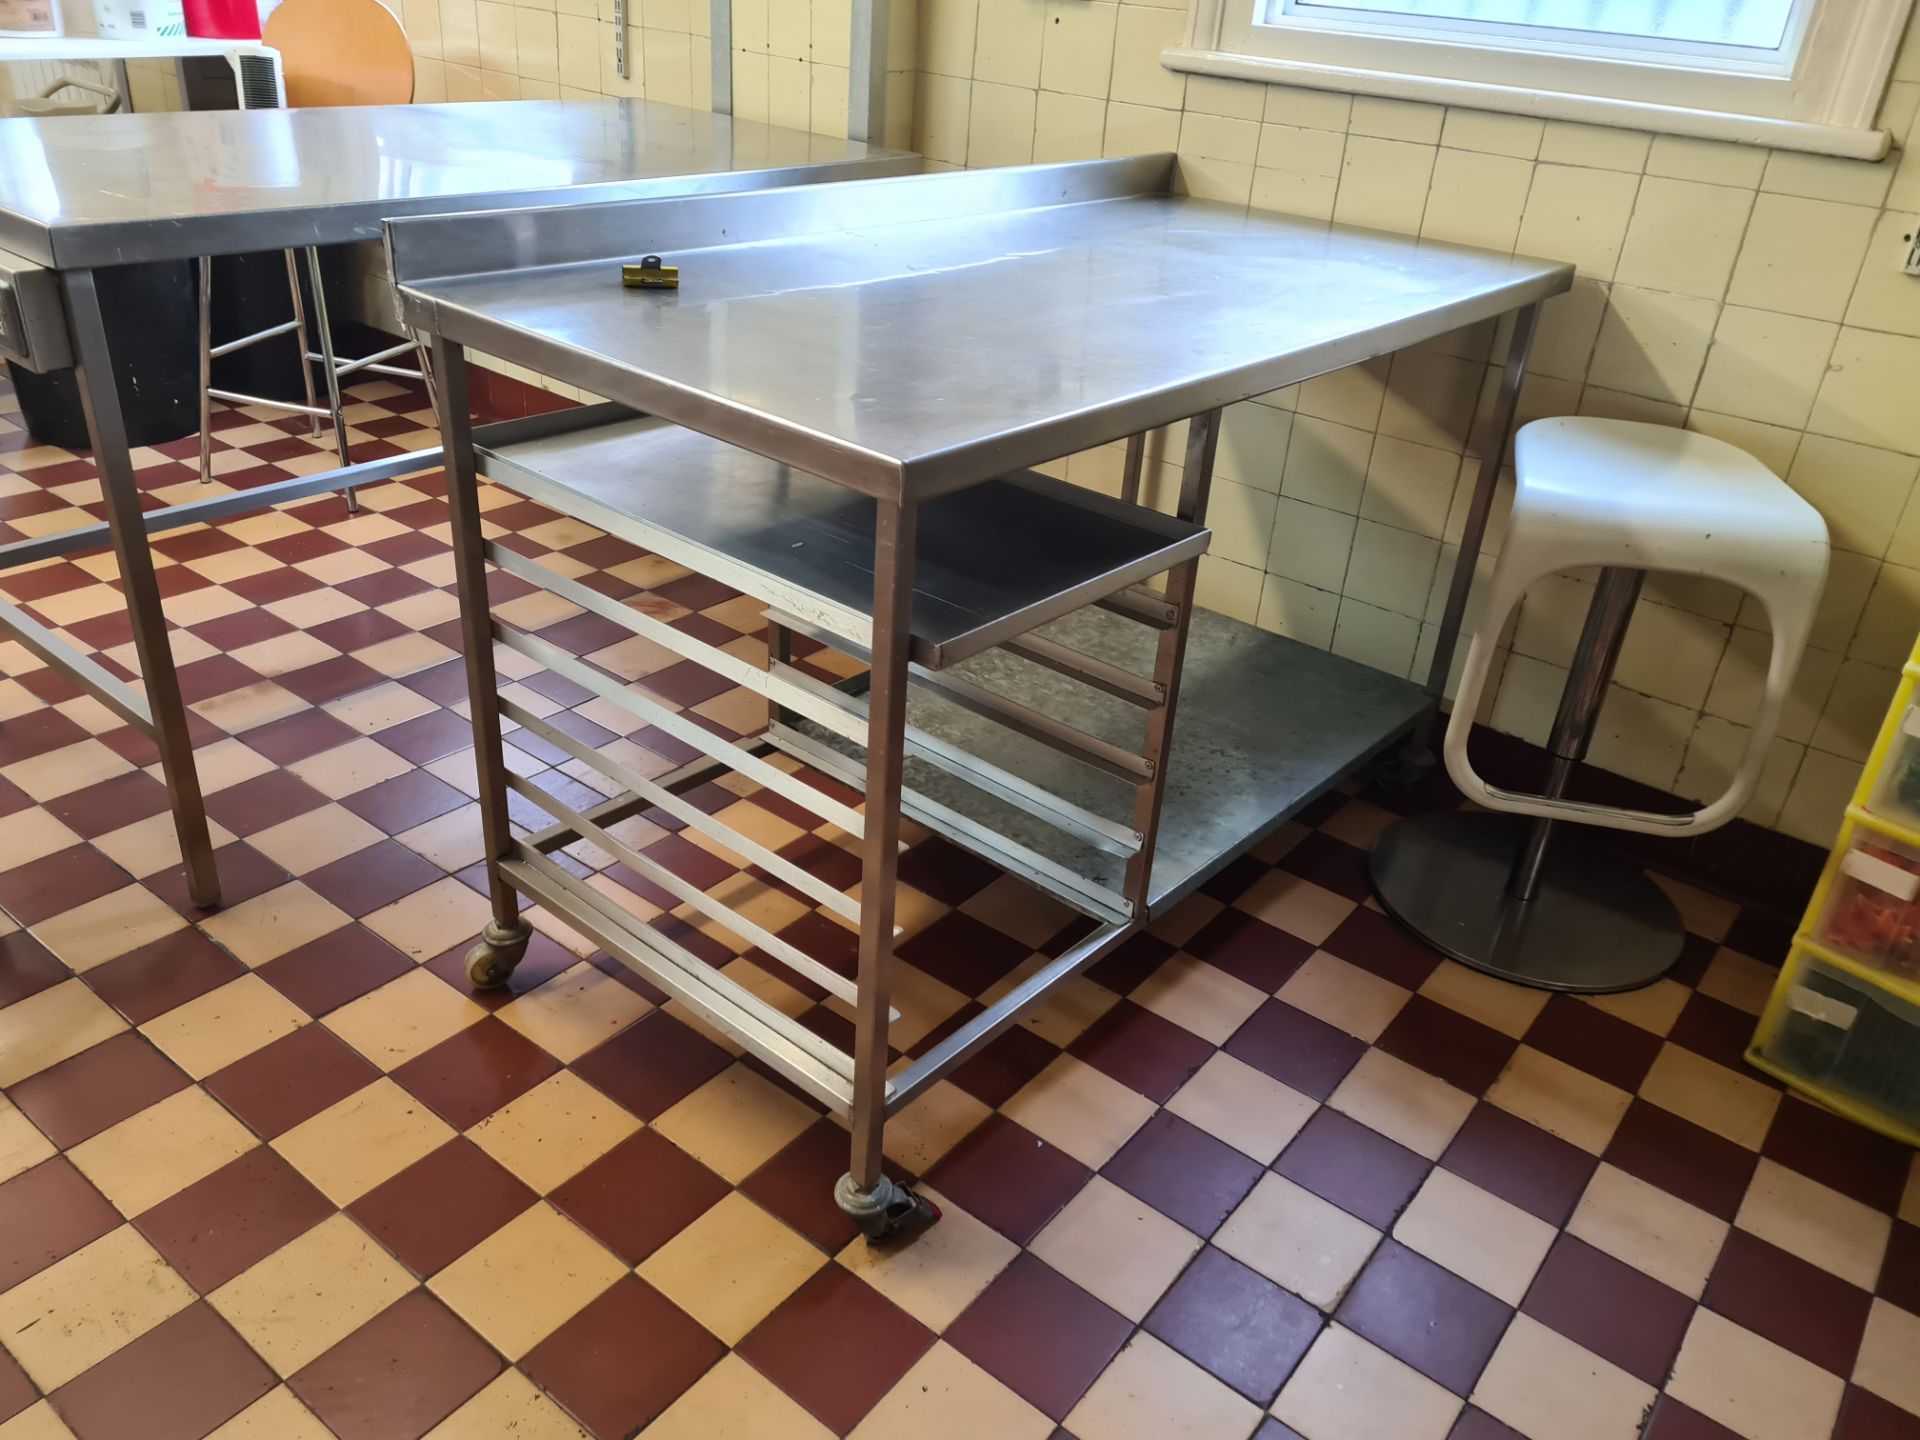 Stainless Steel Preperation Table with Upstand, Shelf and Tray Storage (on castors)